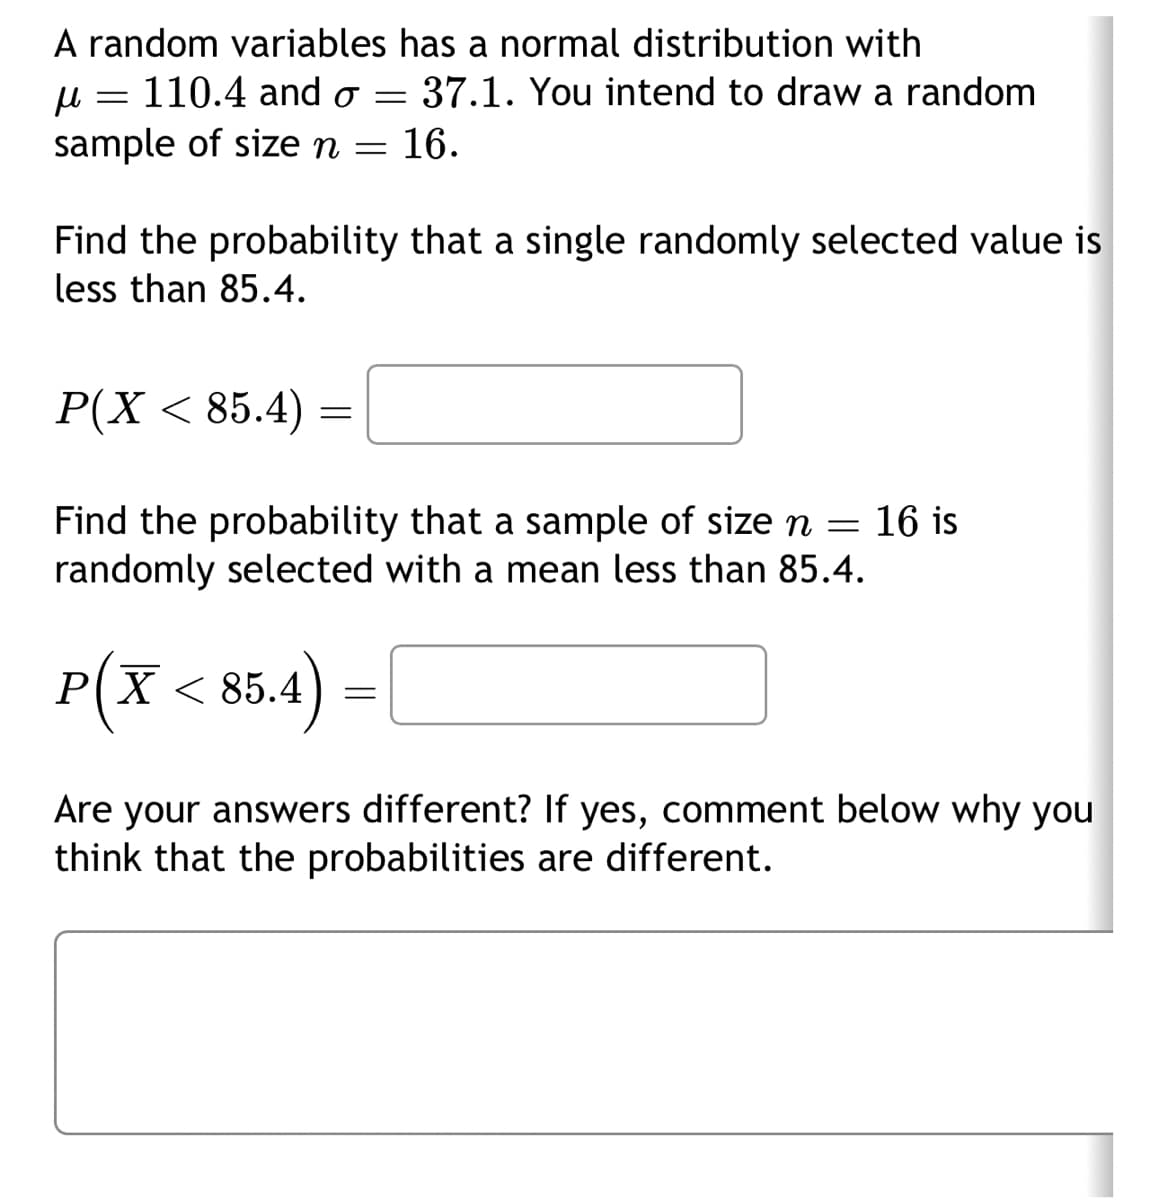 A random variables has a normal distribution with
μ =
110.4 and o = 37.1. You intend to draw a random
sample of size n = 16.
Find the probability that a single randomly selected value is
less than 85.4.
P(X < 85.4)
=
Find the probability that a sample of size n = 16 is
randomly selected with a mean less than 85.4.
P(X < 85.4)
=
Are your answers different? If yes, comment below why you
think that the probabilities are different.